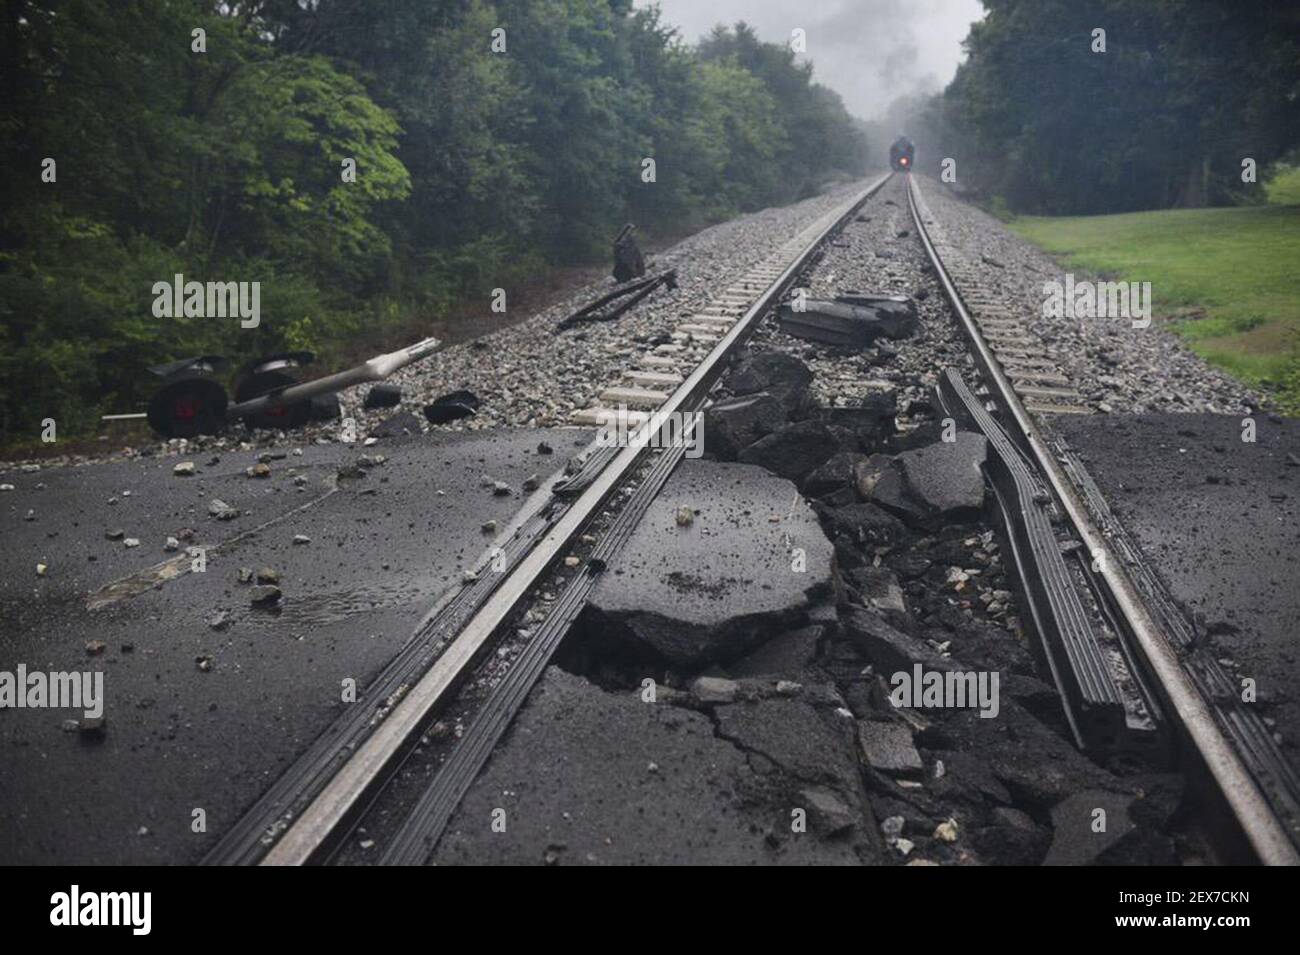 A damaged rail bed is seen near a CSX train following the derailment of a tank car carrying a 'highly flammable and toxic' gas on Thursday, July 2, 2015, in Maryville, Tenn. The single tank car loaded with acrylonitrile, a hazardous material used in a variety of industrial processes including the manufacture of plastics, forced an evacuation of residences and businesses in a two-mile radius. (Photo by Michael Patrick/Knoxville News Sentinel/TNS) *** Please Use Credit from Credit Field *** Stock Photo